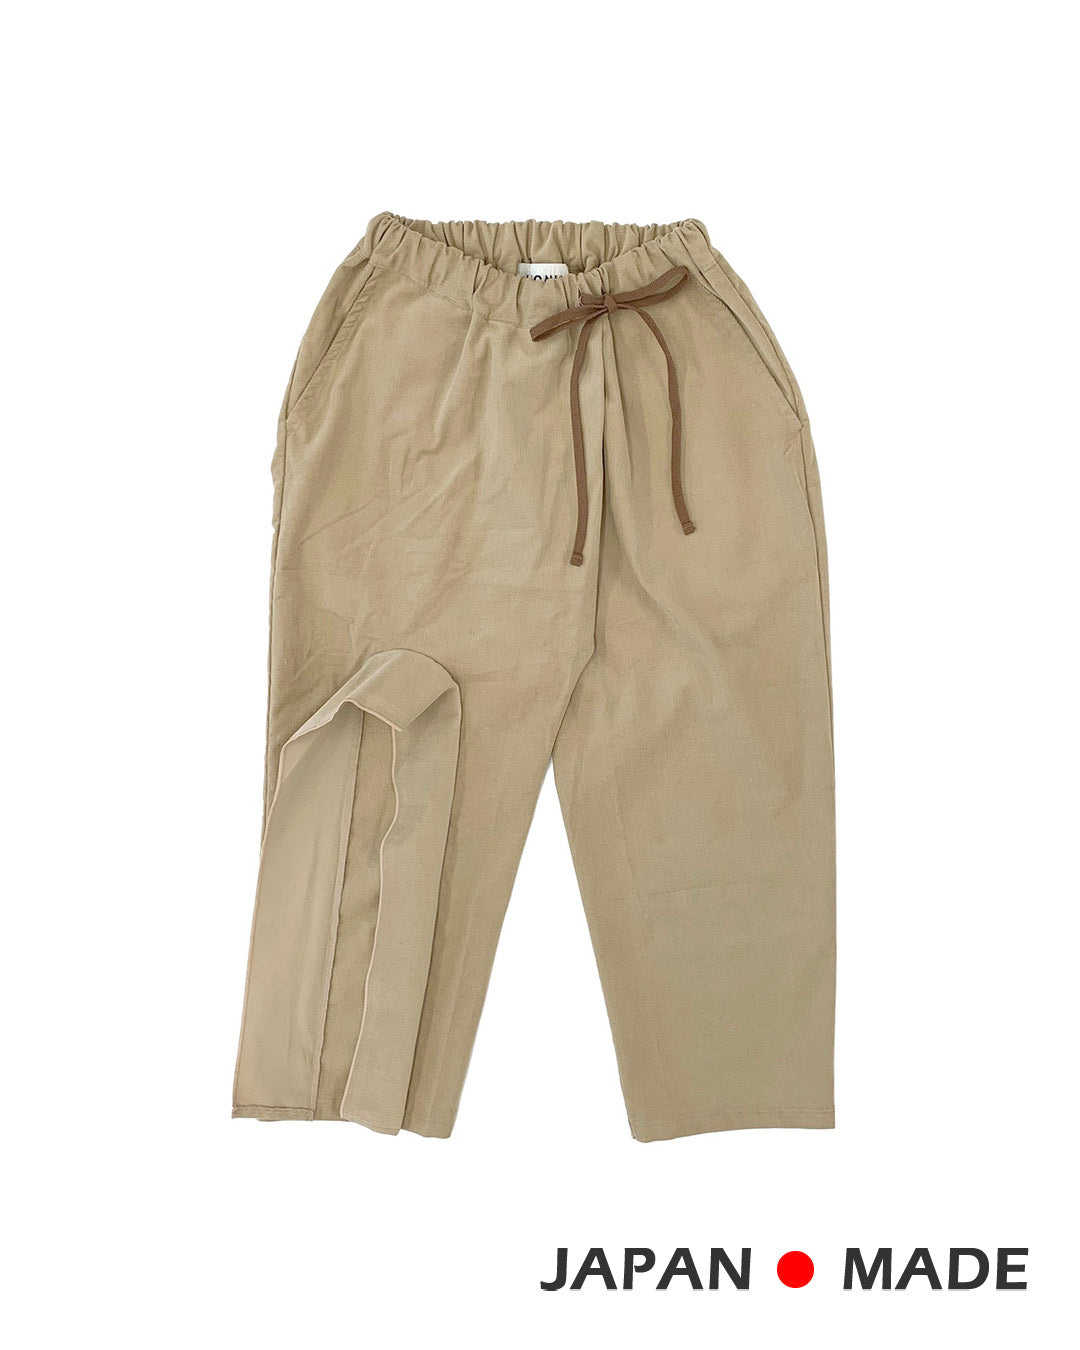 ☆reserve☆  UNIONINI / Unionini / Corduroy Long Pants (Brown) PT094 Delivery date September